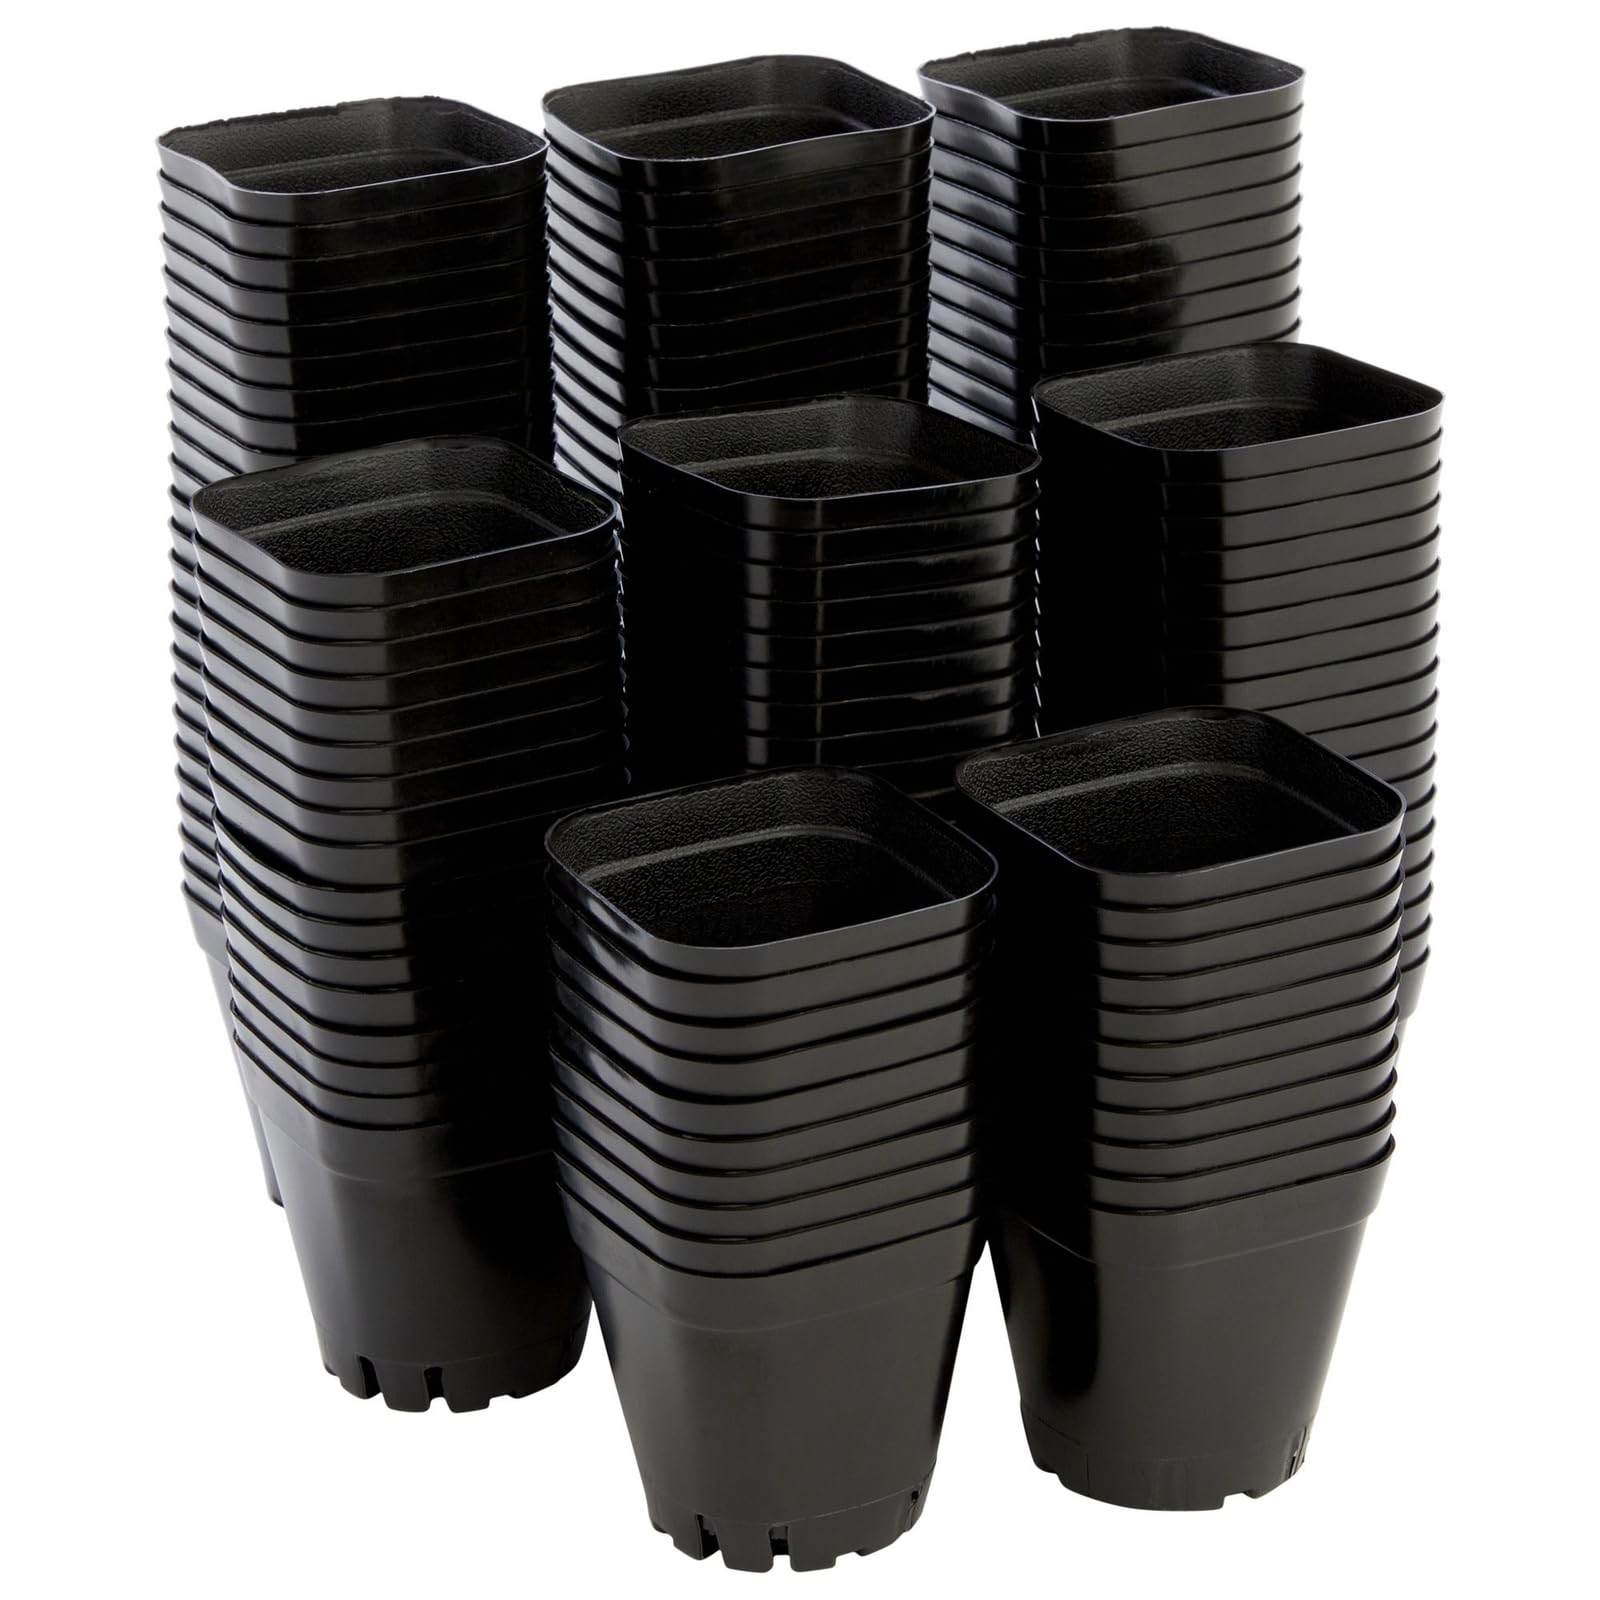 Juvale 150-Pack 2 Inch Plastic Seedling Pots for Plants, Small Square Starter Nursery Planters for Starting Seeds, Flowers, Succulents, Propagating, Indoor Garden (Black)